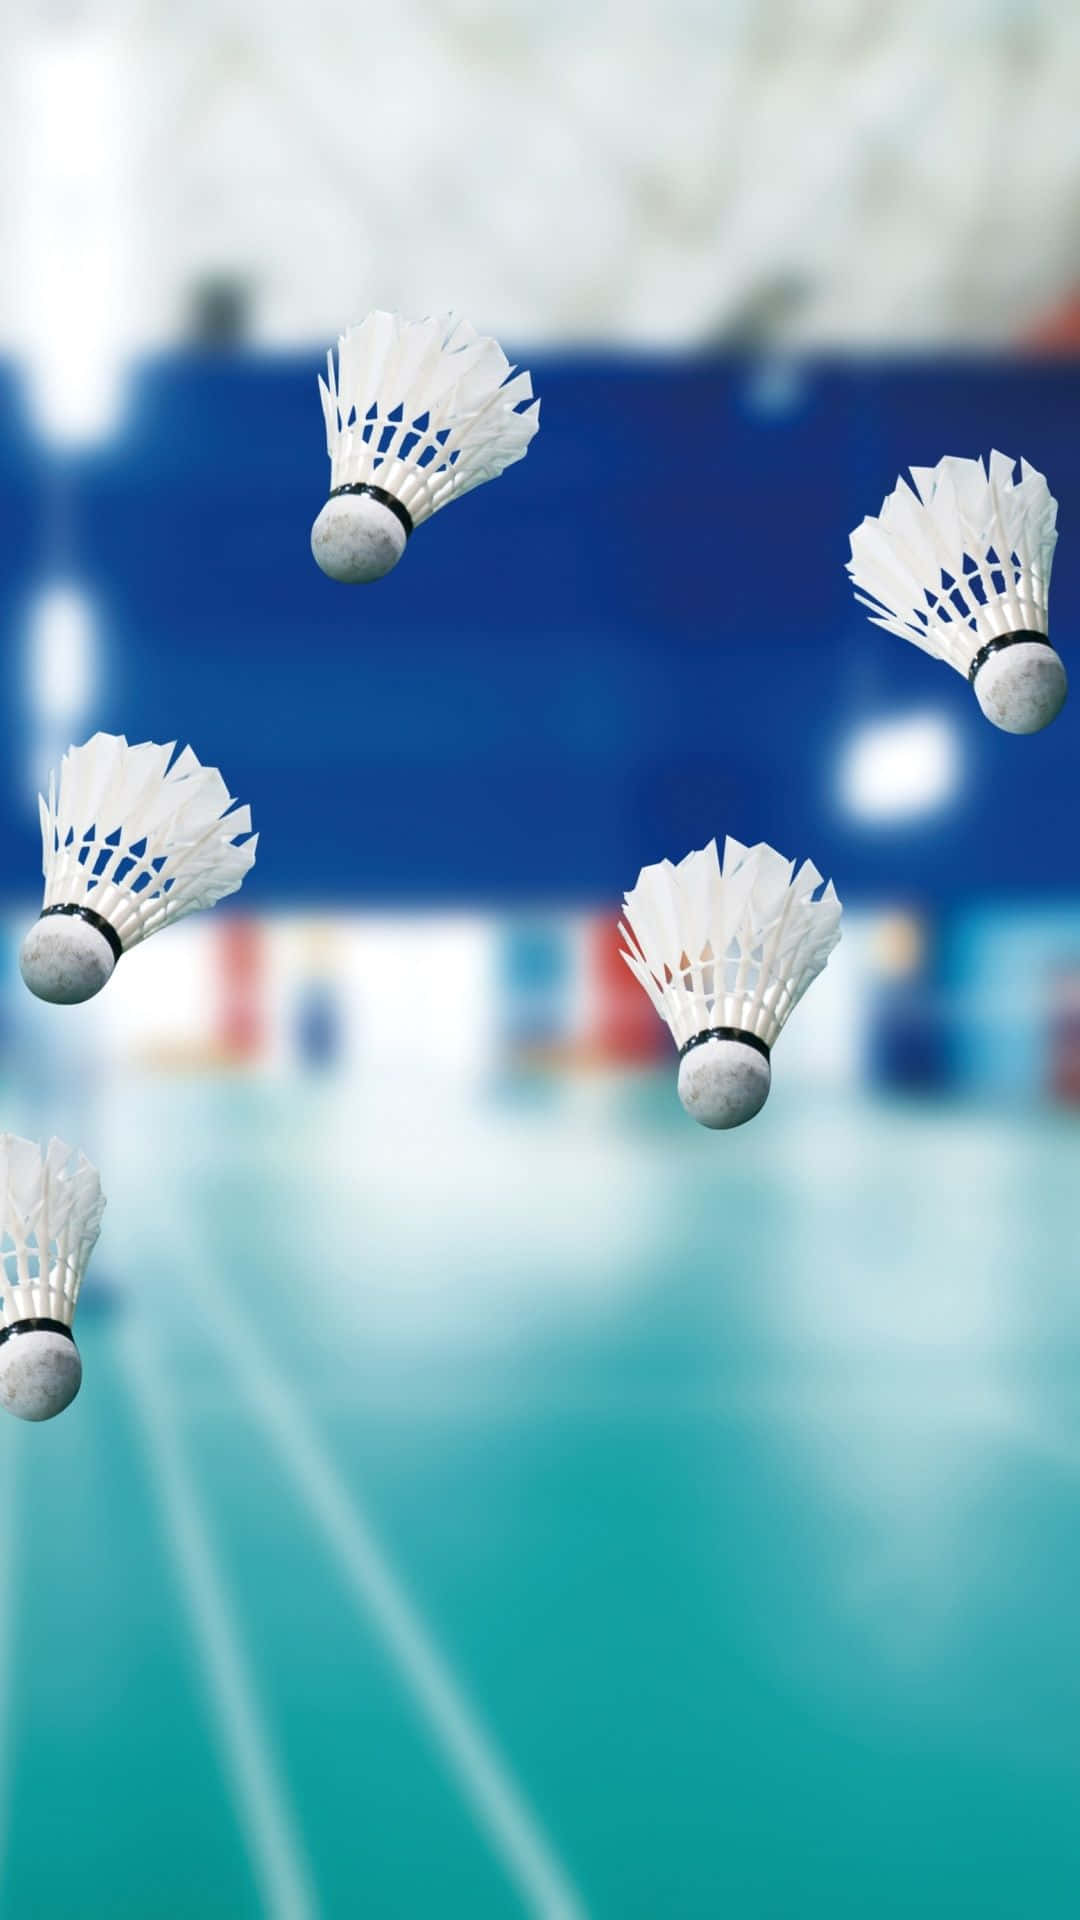 Shuttlecocks With Blue Court Pixel 3 Badminton Background